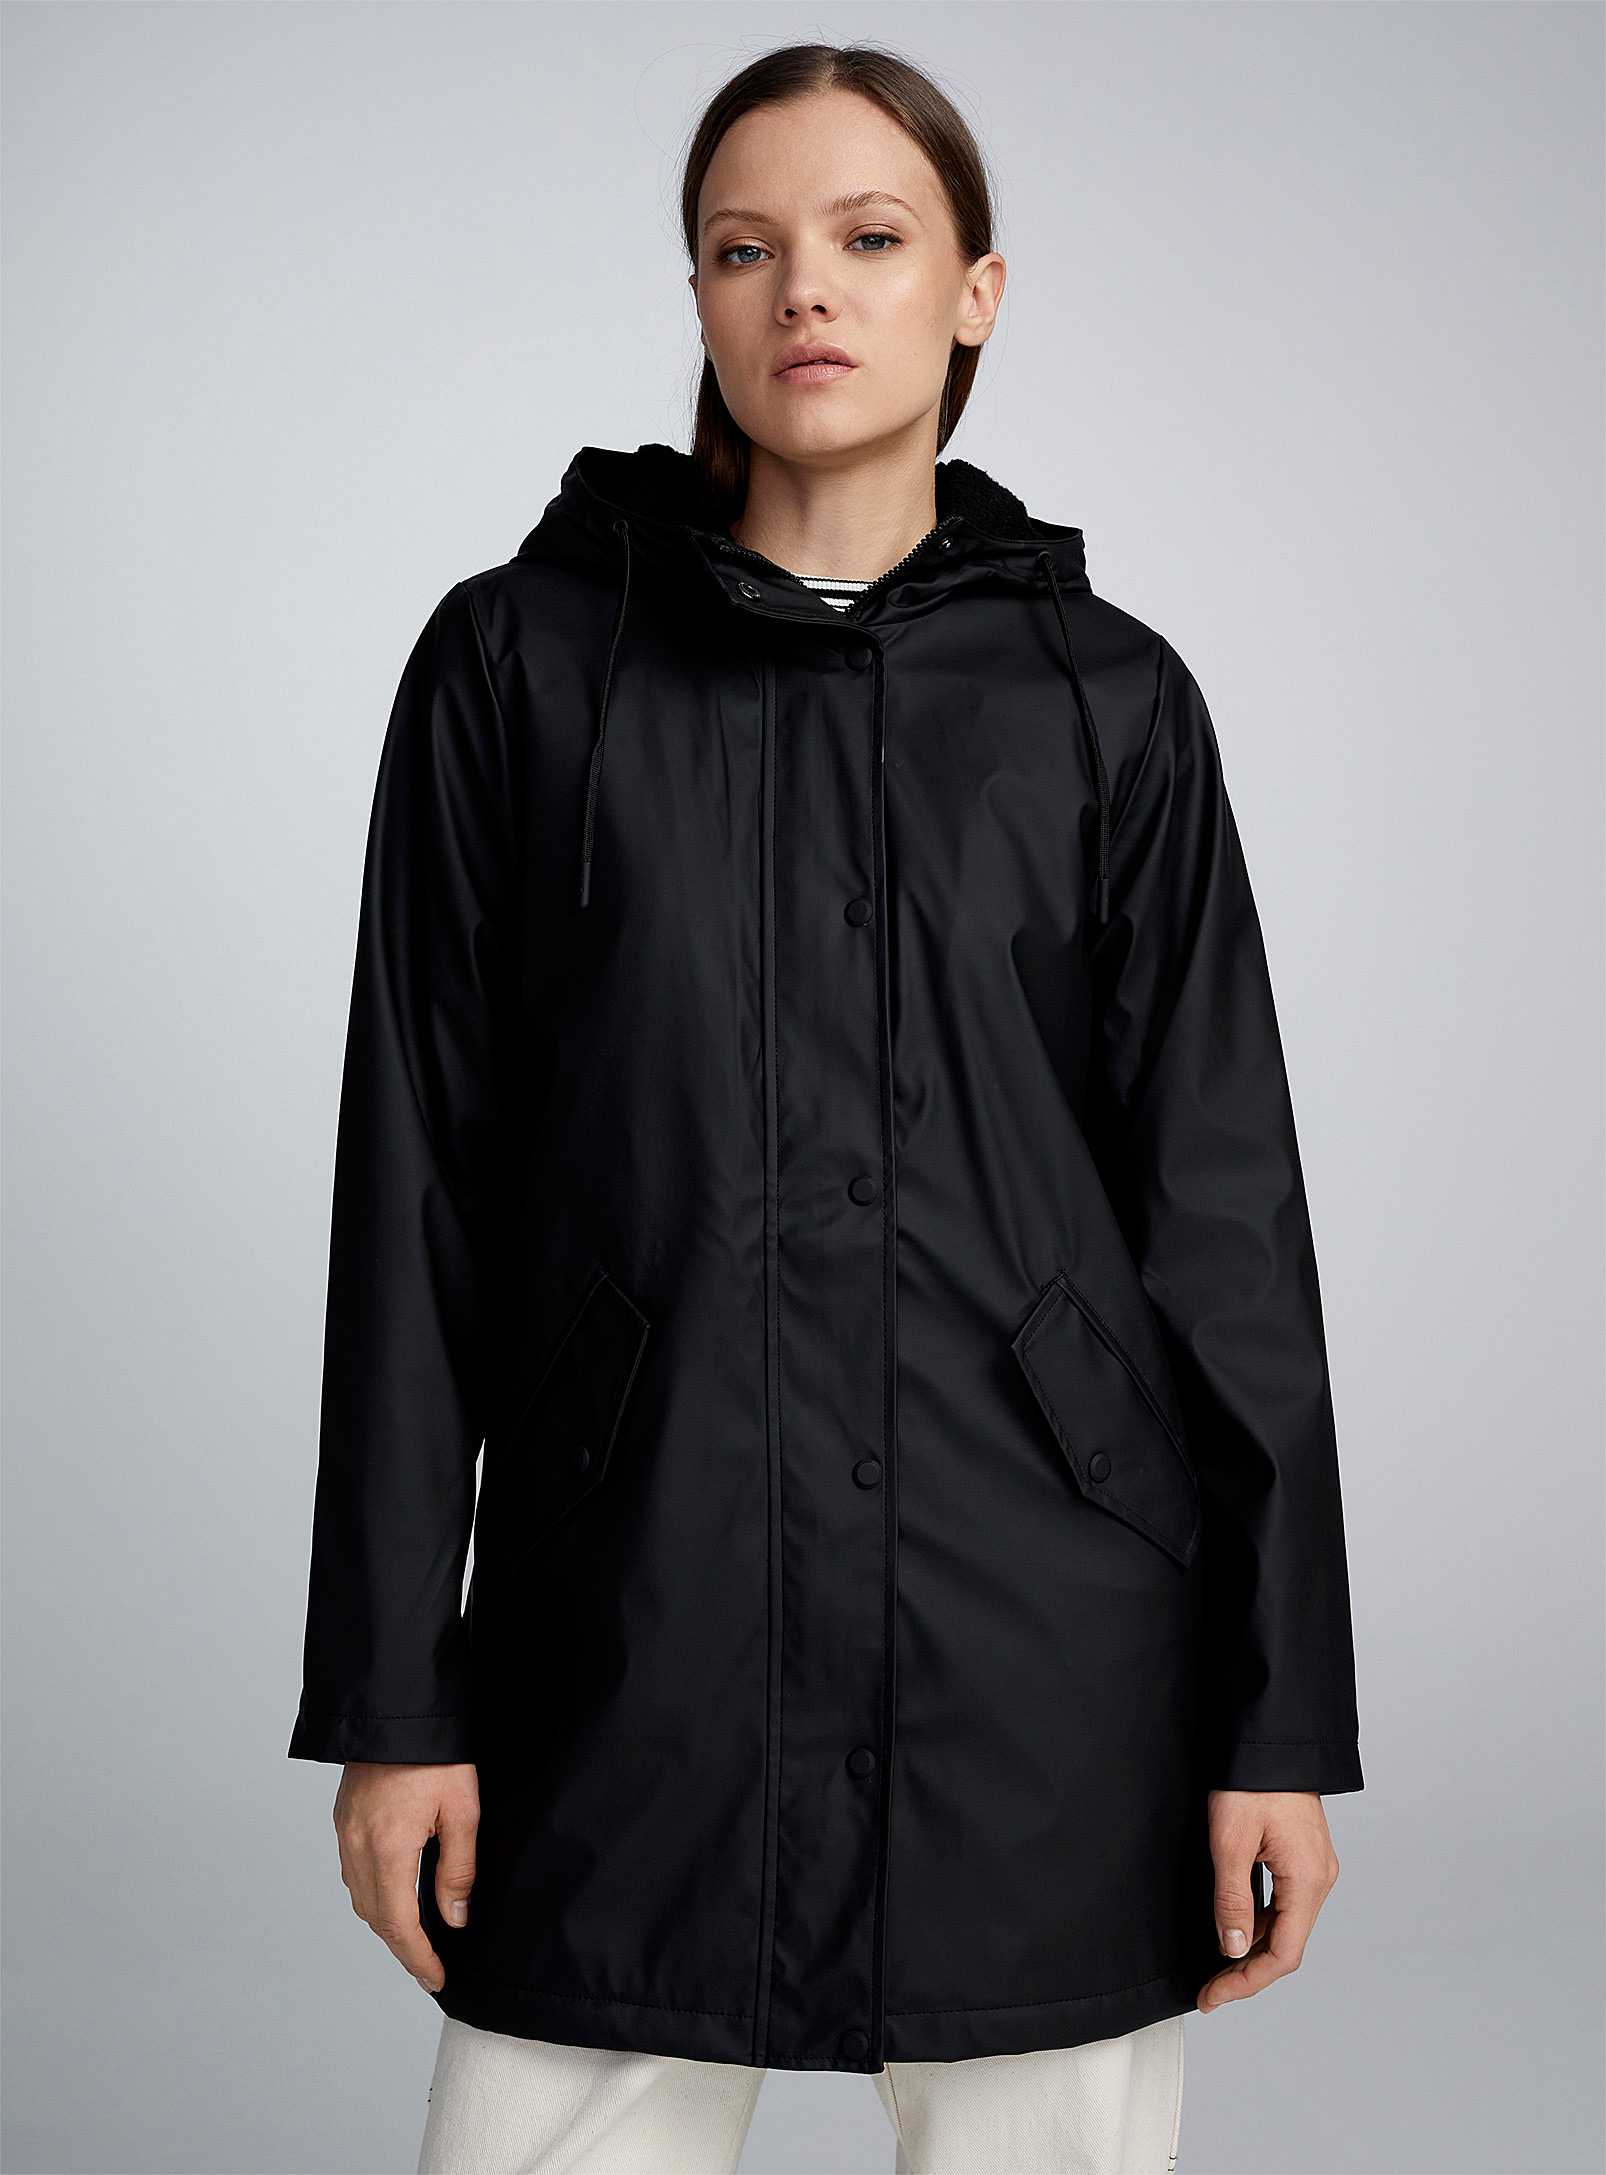 Only - Women's Sherpa Sally lining raincoat